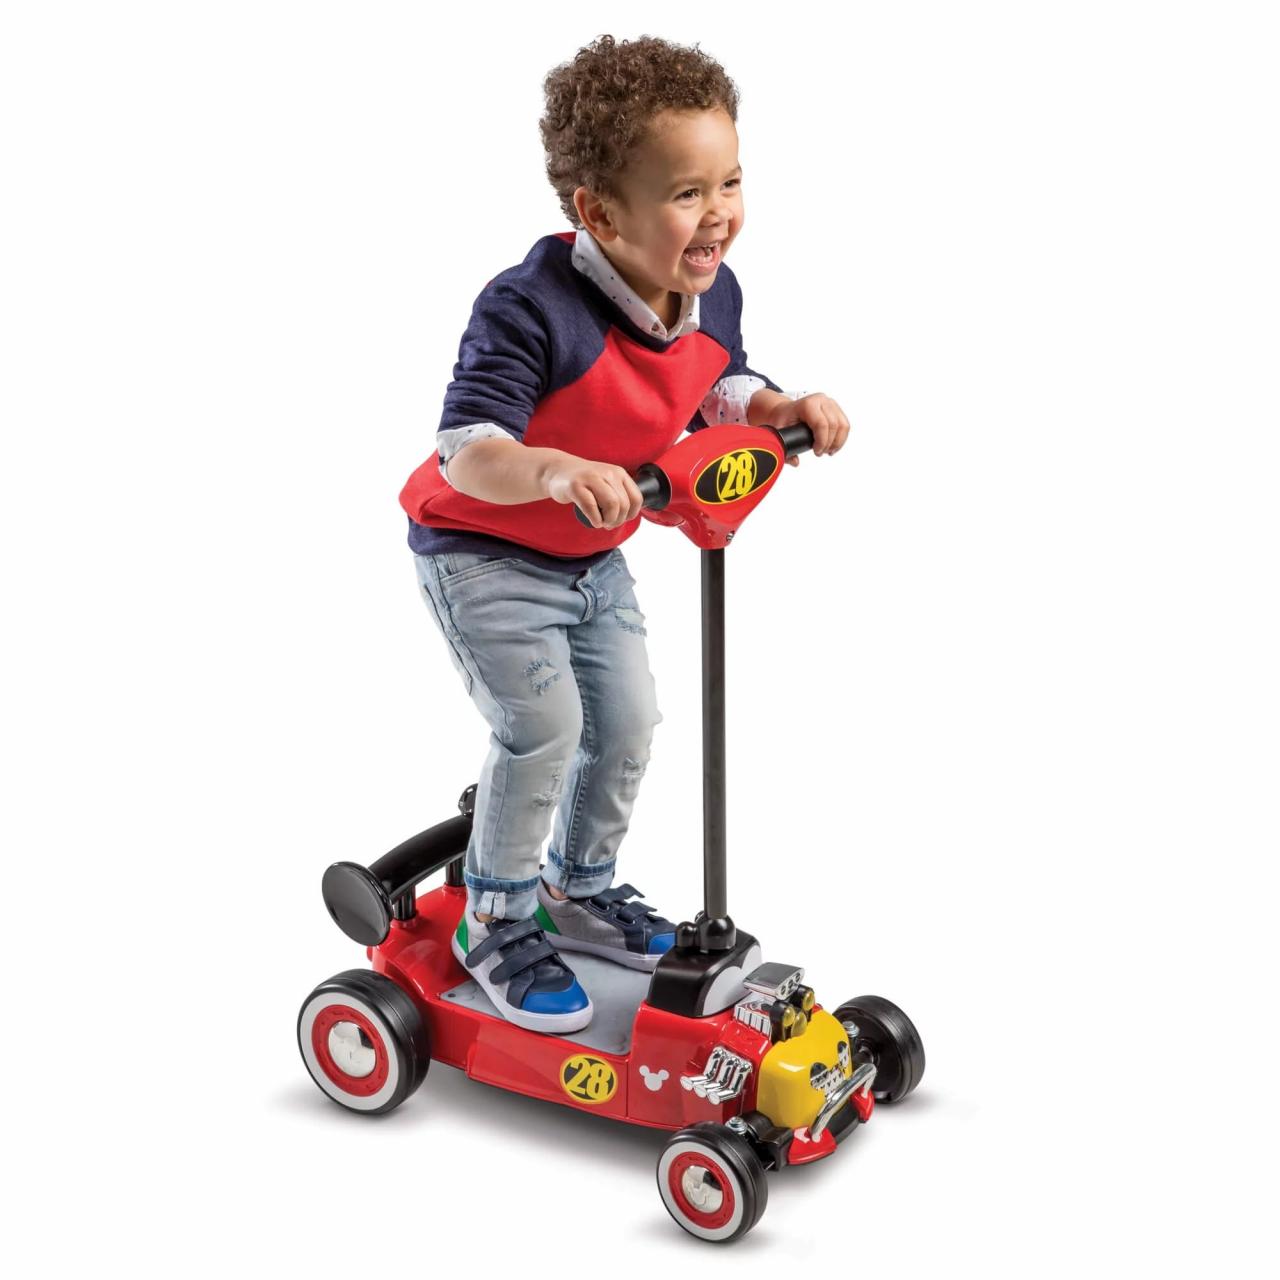 Disney Mickey Mouse 6V BatteryPowered RideOn Scooter by Huffy